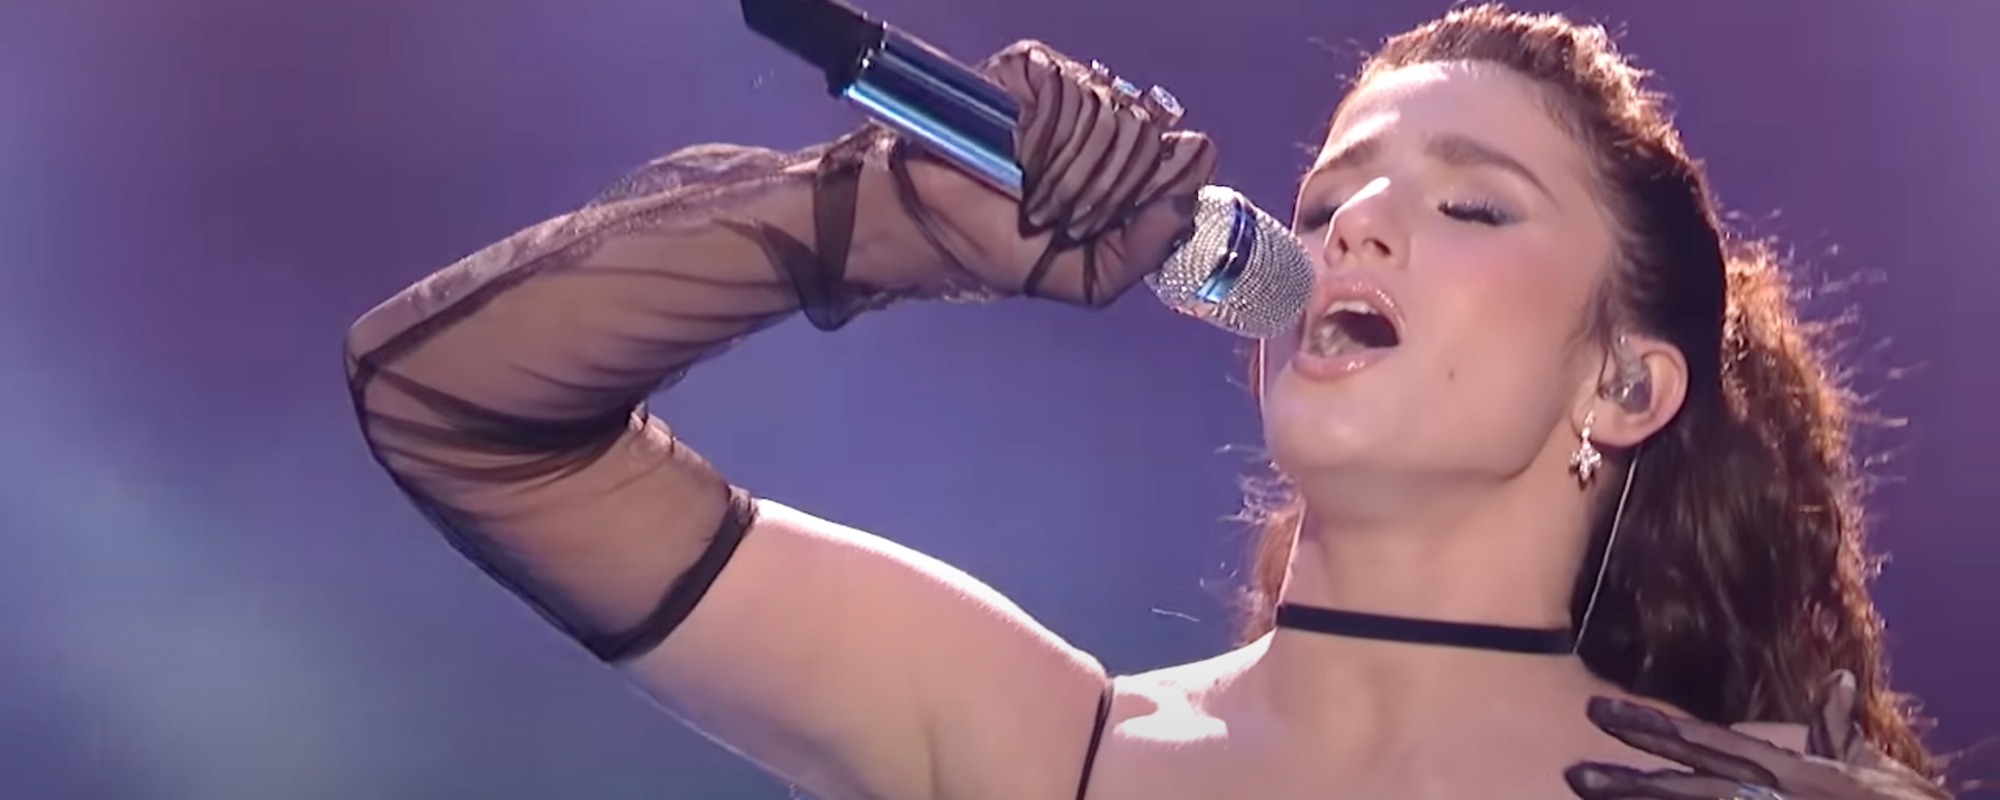 Abi Carter Lights Up the ‘American Idol’ Stage With Little Mermaid’s “Part of Your World”